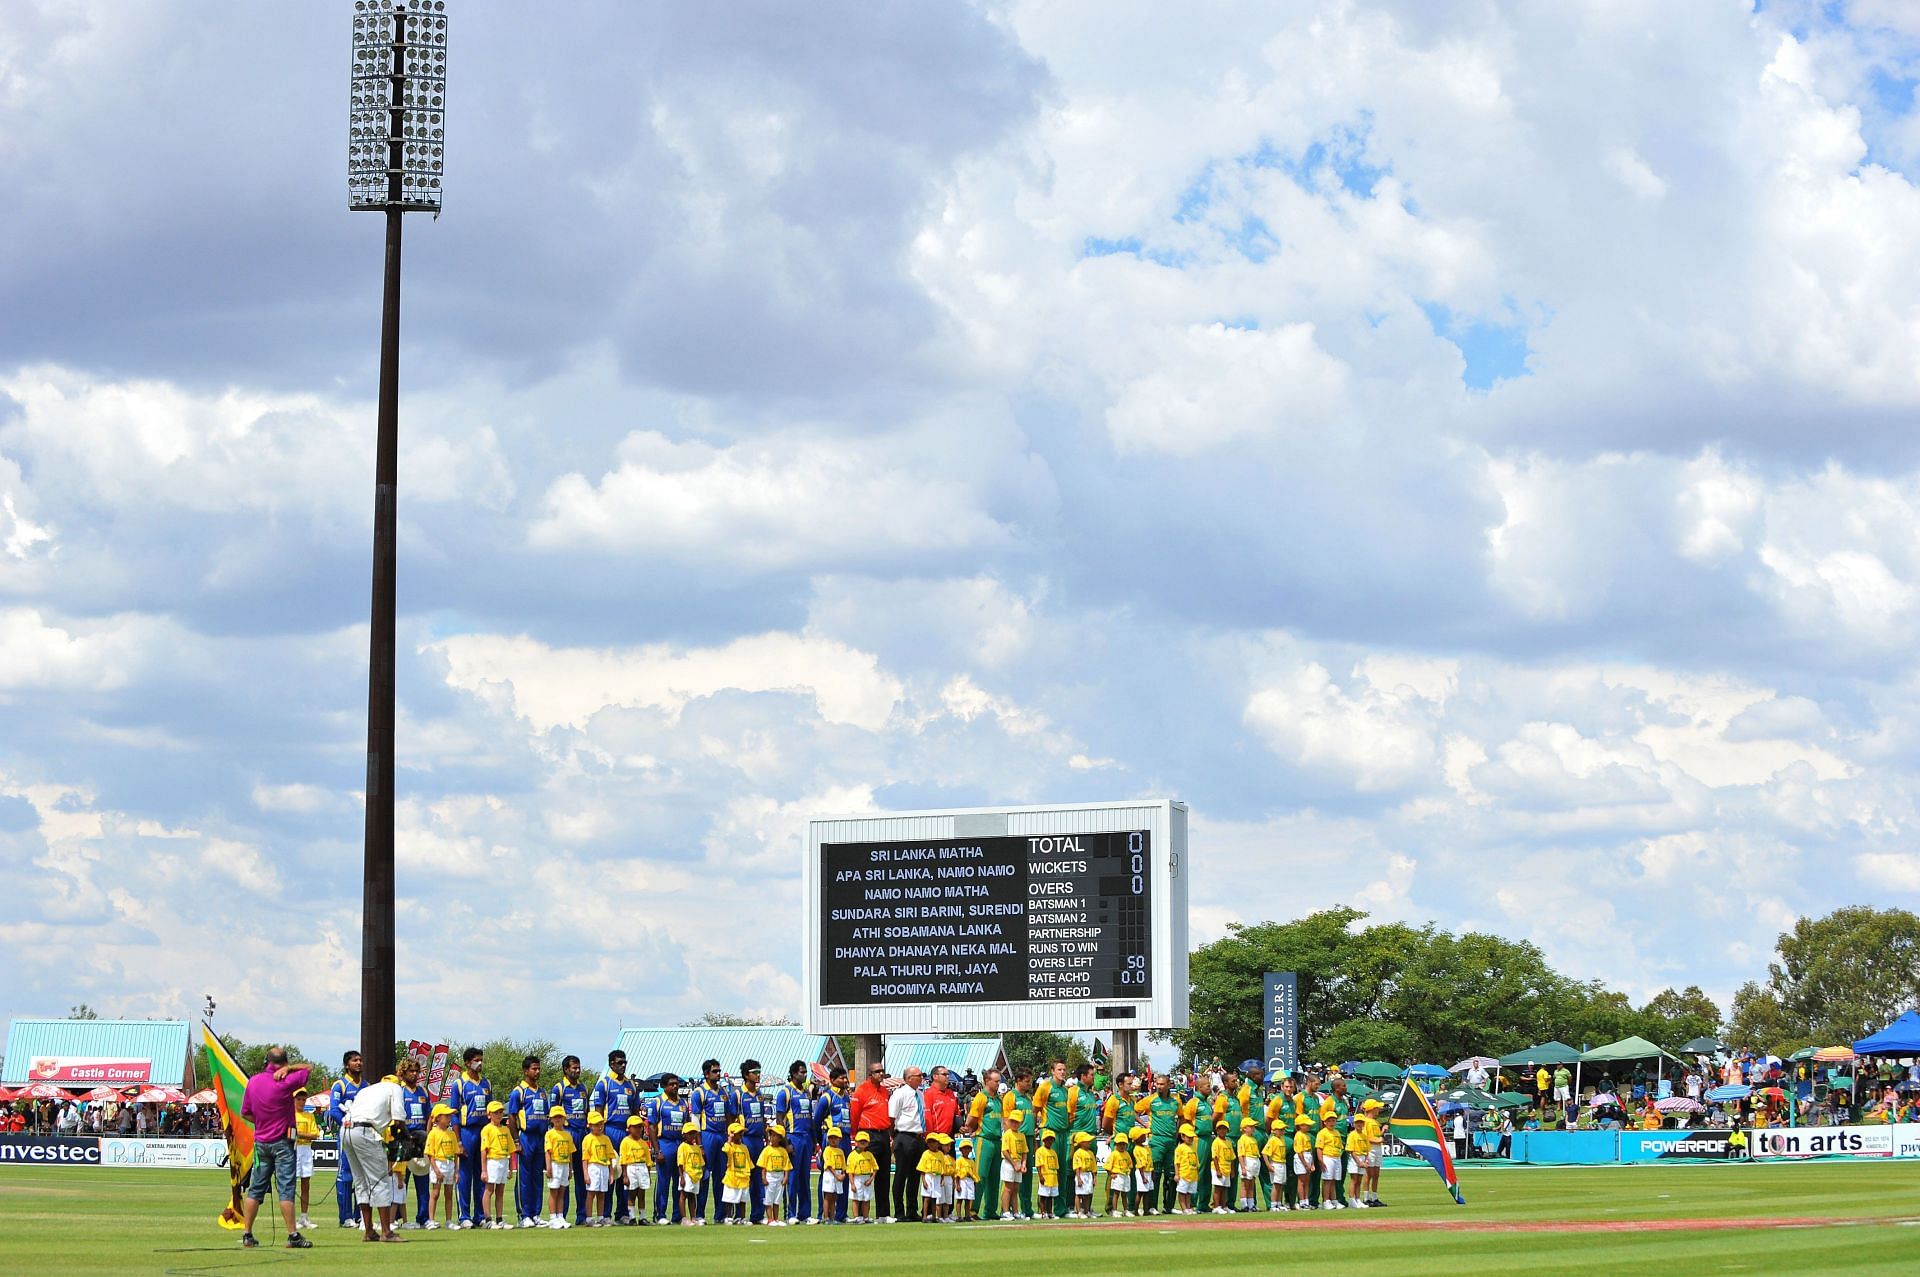 The Diamond Oval in Kimberley will host the game